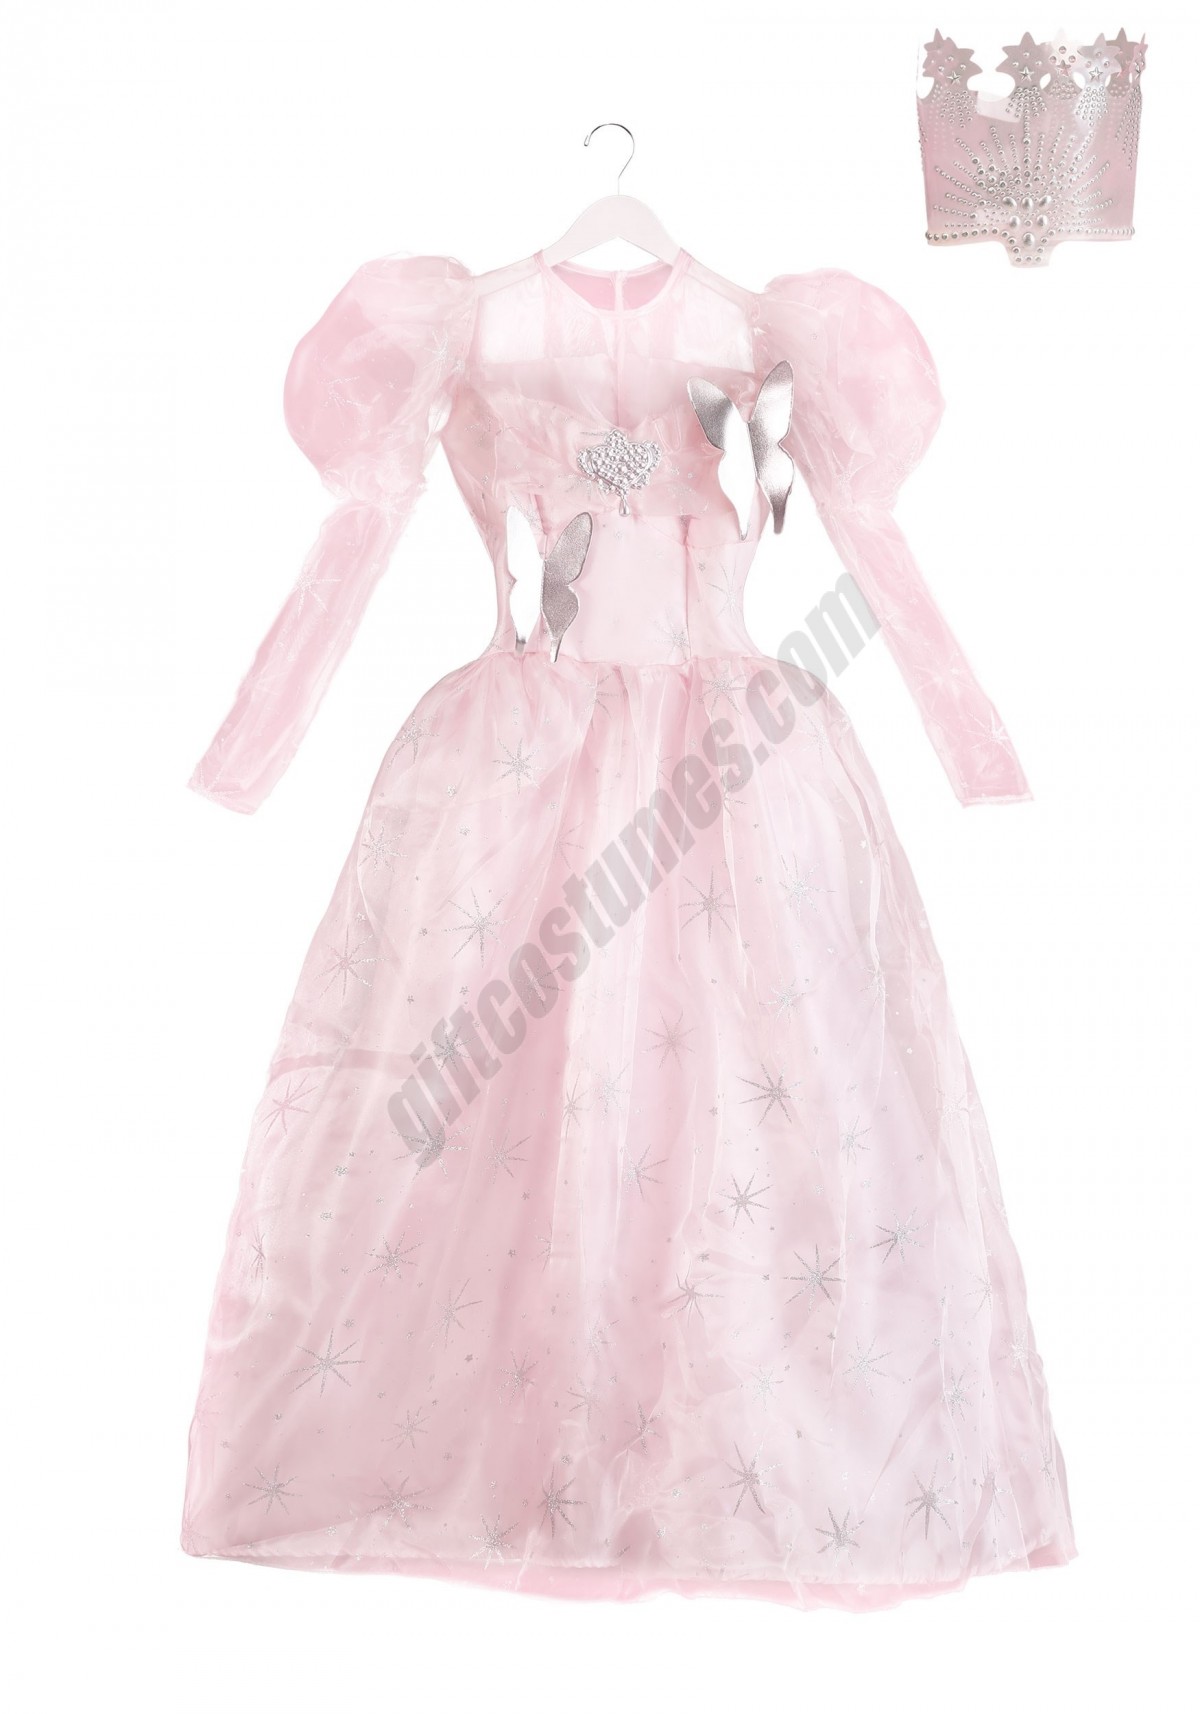 Deluxe Wizard of Oz Glinda the Good Witch Plus Size Women's Costume - -10